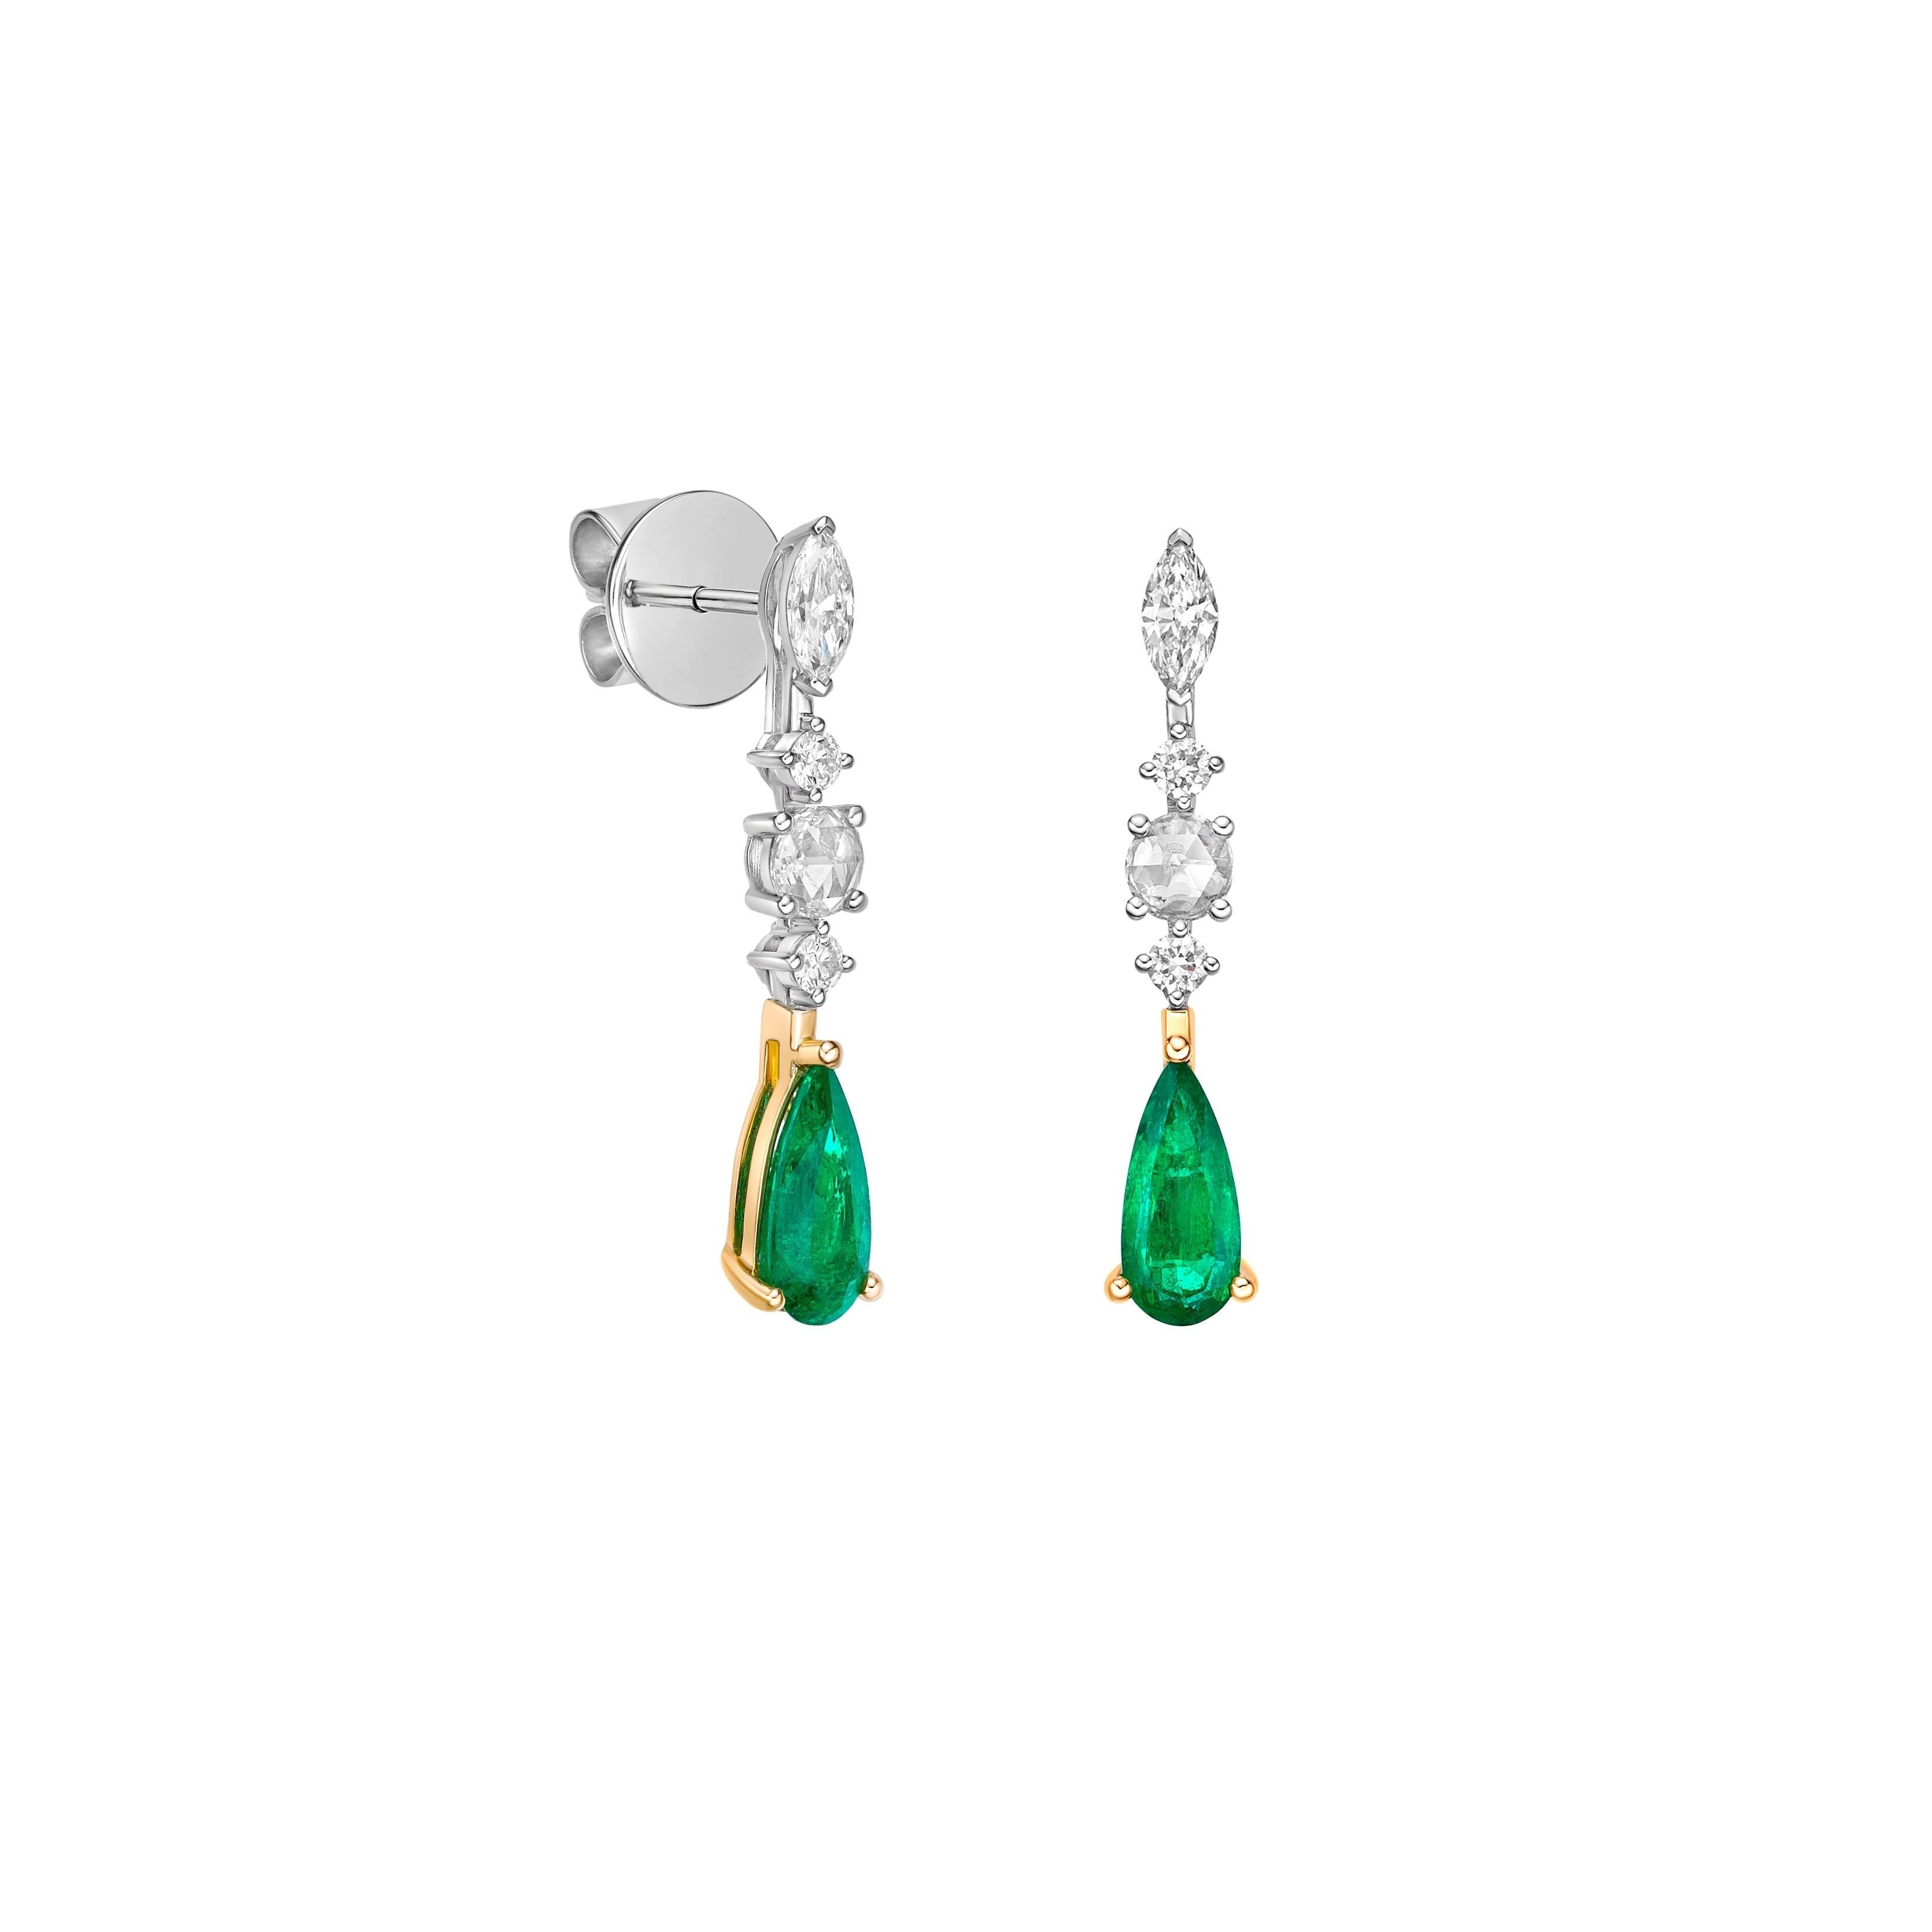 Regalia Earrings by Sunita Nahata Fine Design. A statement piece created using the finest Emeralds. Featuring subtle playful dangles these are a must have to glam up your evening look. 
  
Emerald Drop Earrings in 18Karat White Yellow Gold with